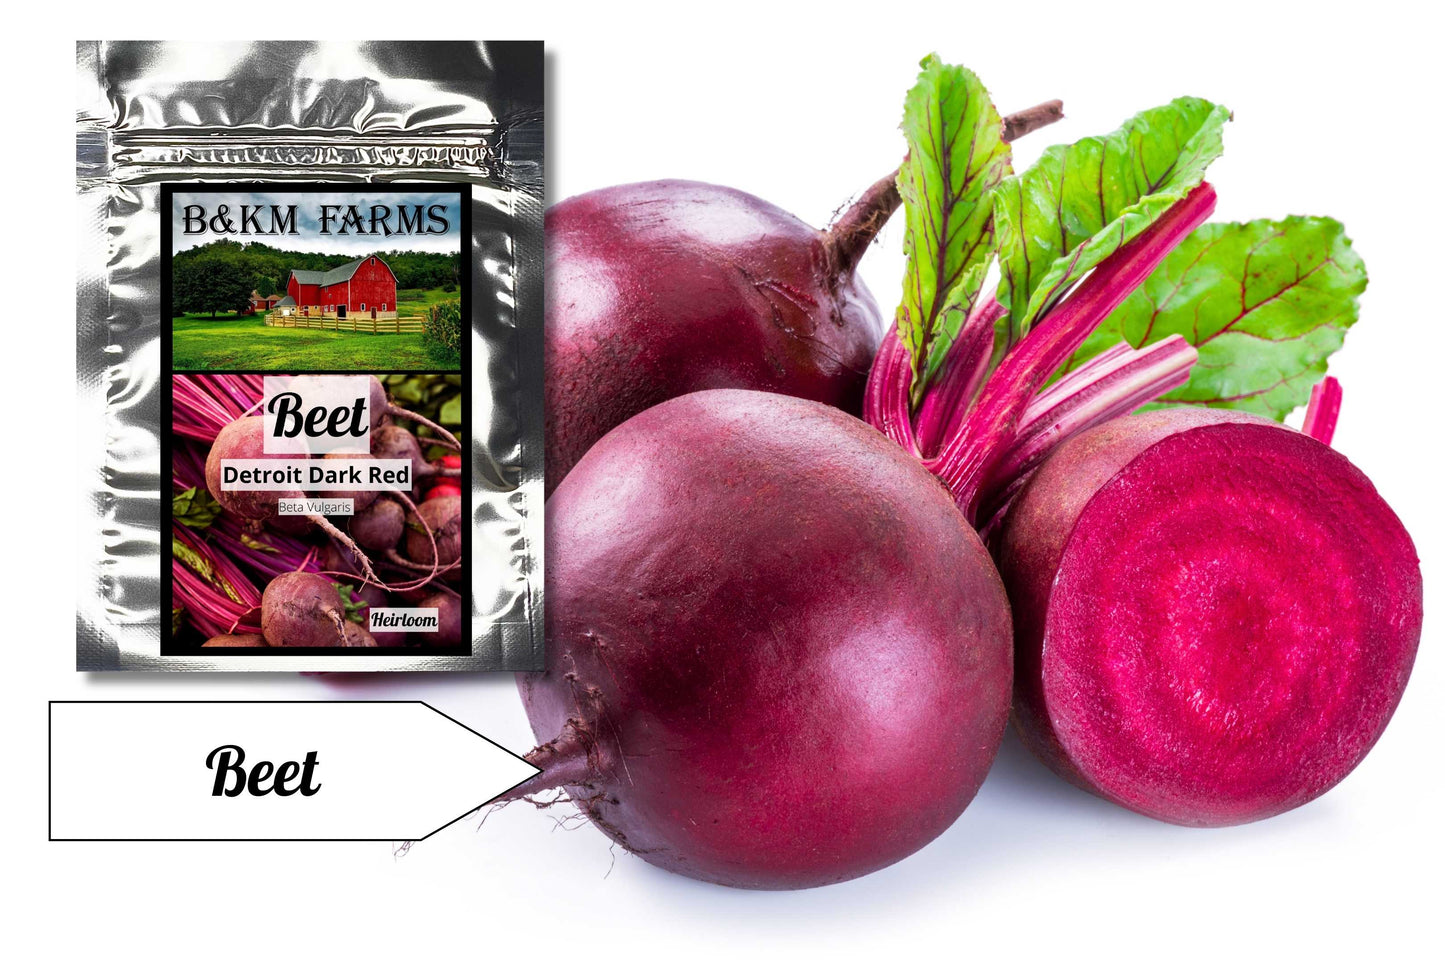 Beet Detroit Dark Red: Earth's Ruby Jewels, Bursting with Flavor